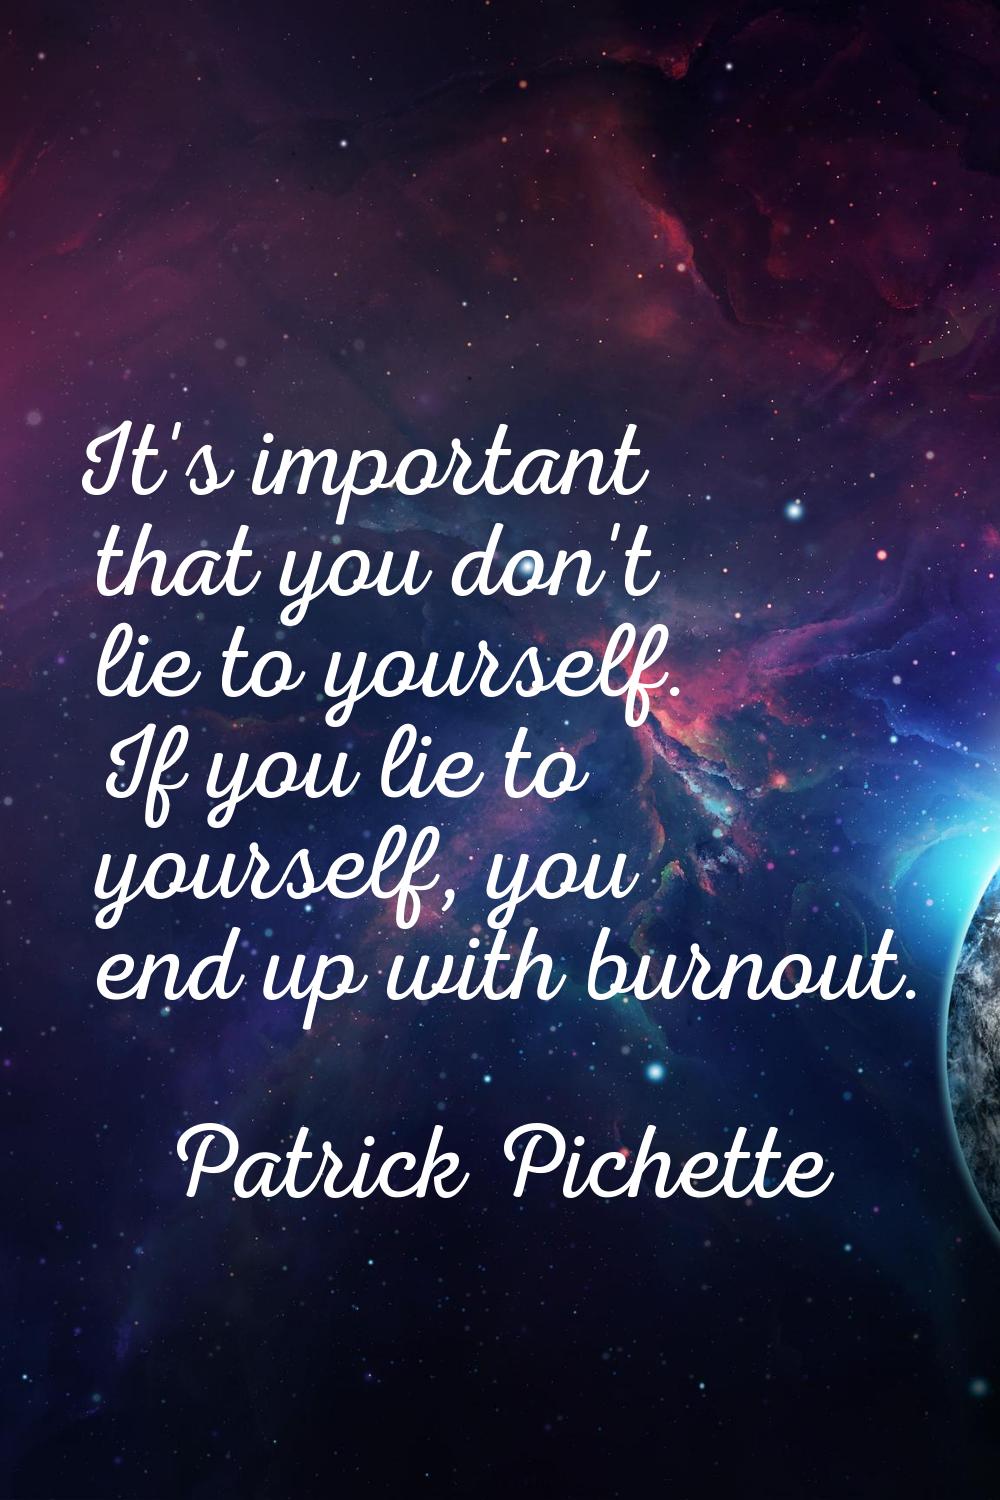 It's important that you don't lie to yourself. If you lie to yourself, you end up with burnout.